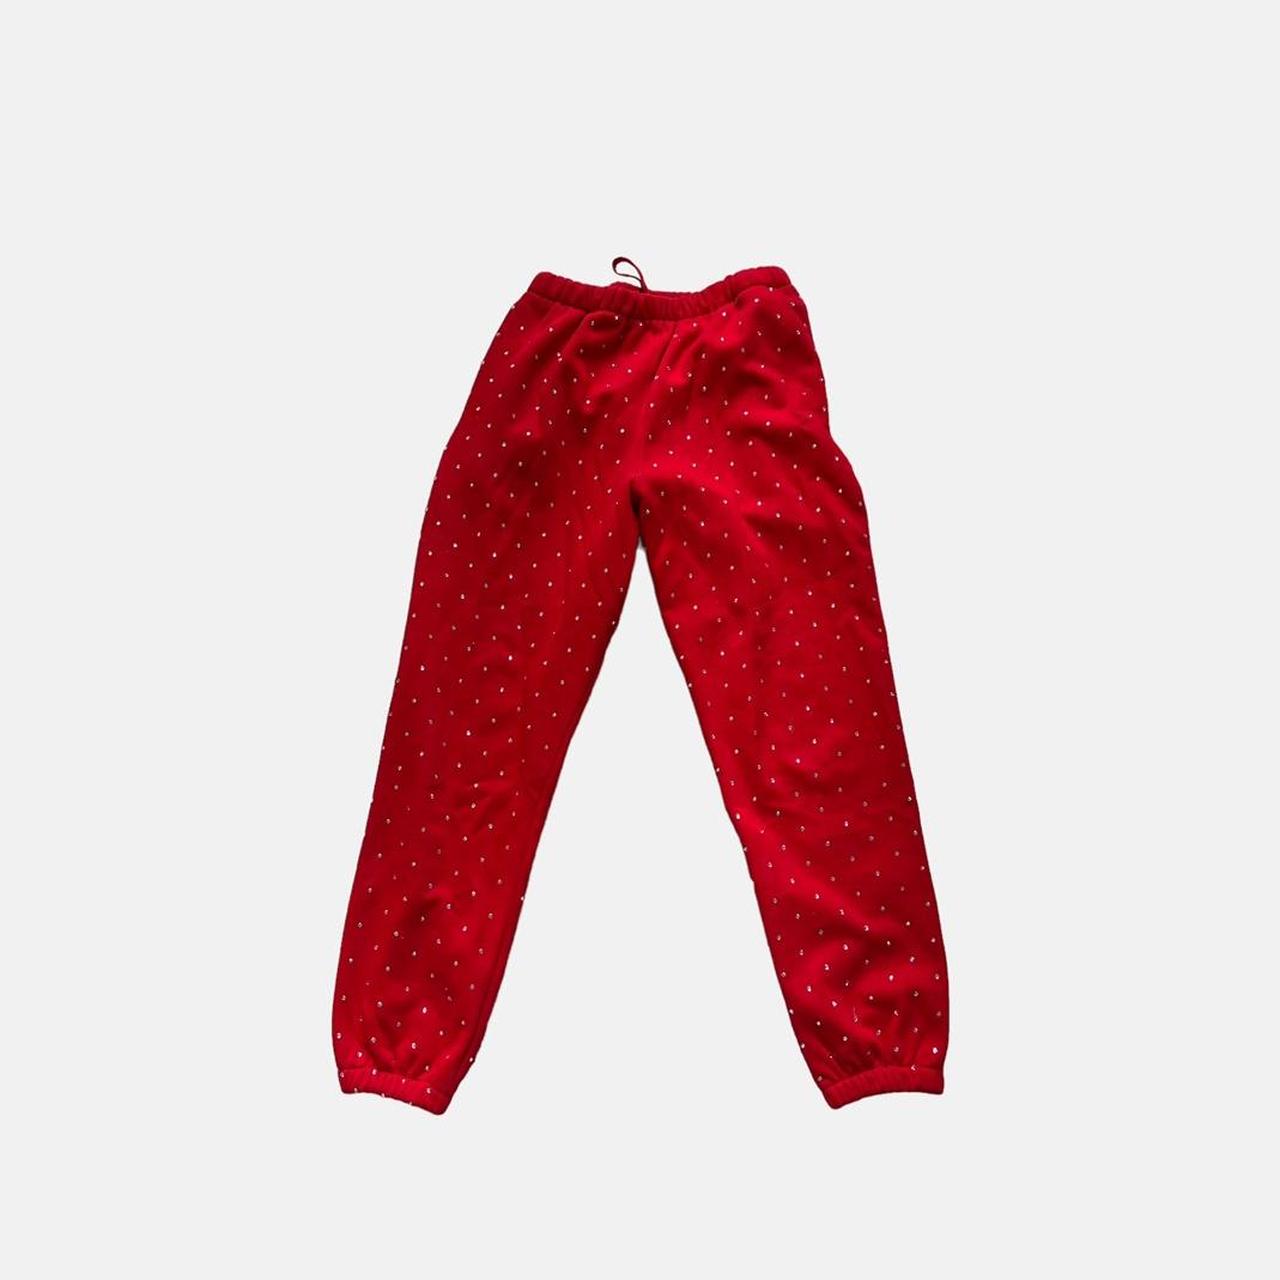 Women's Red Joggers-tracksuits | Depop